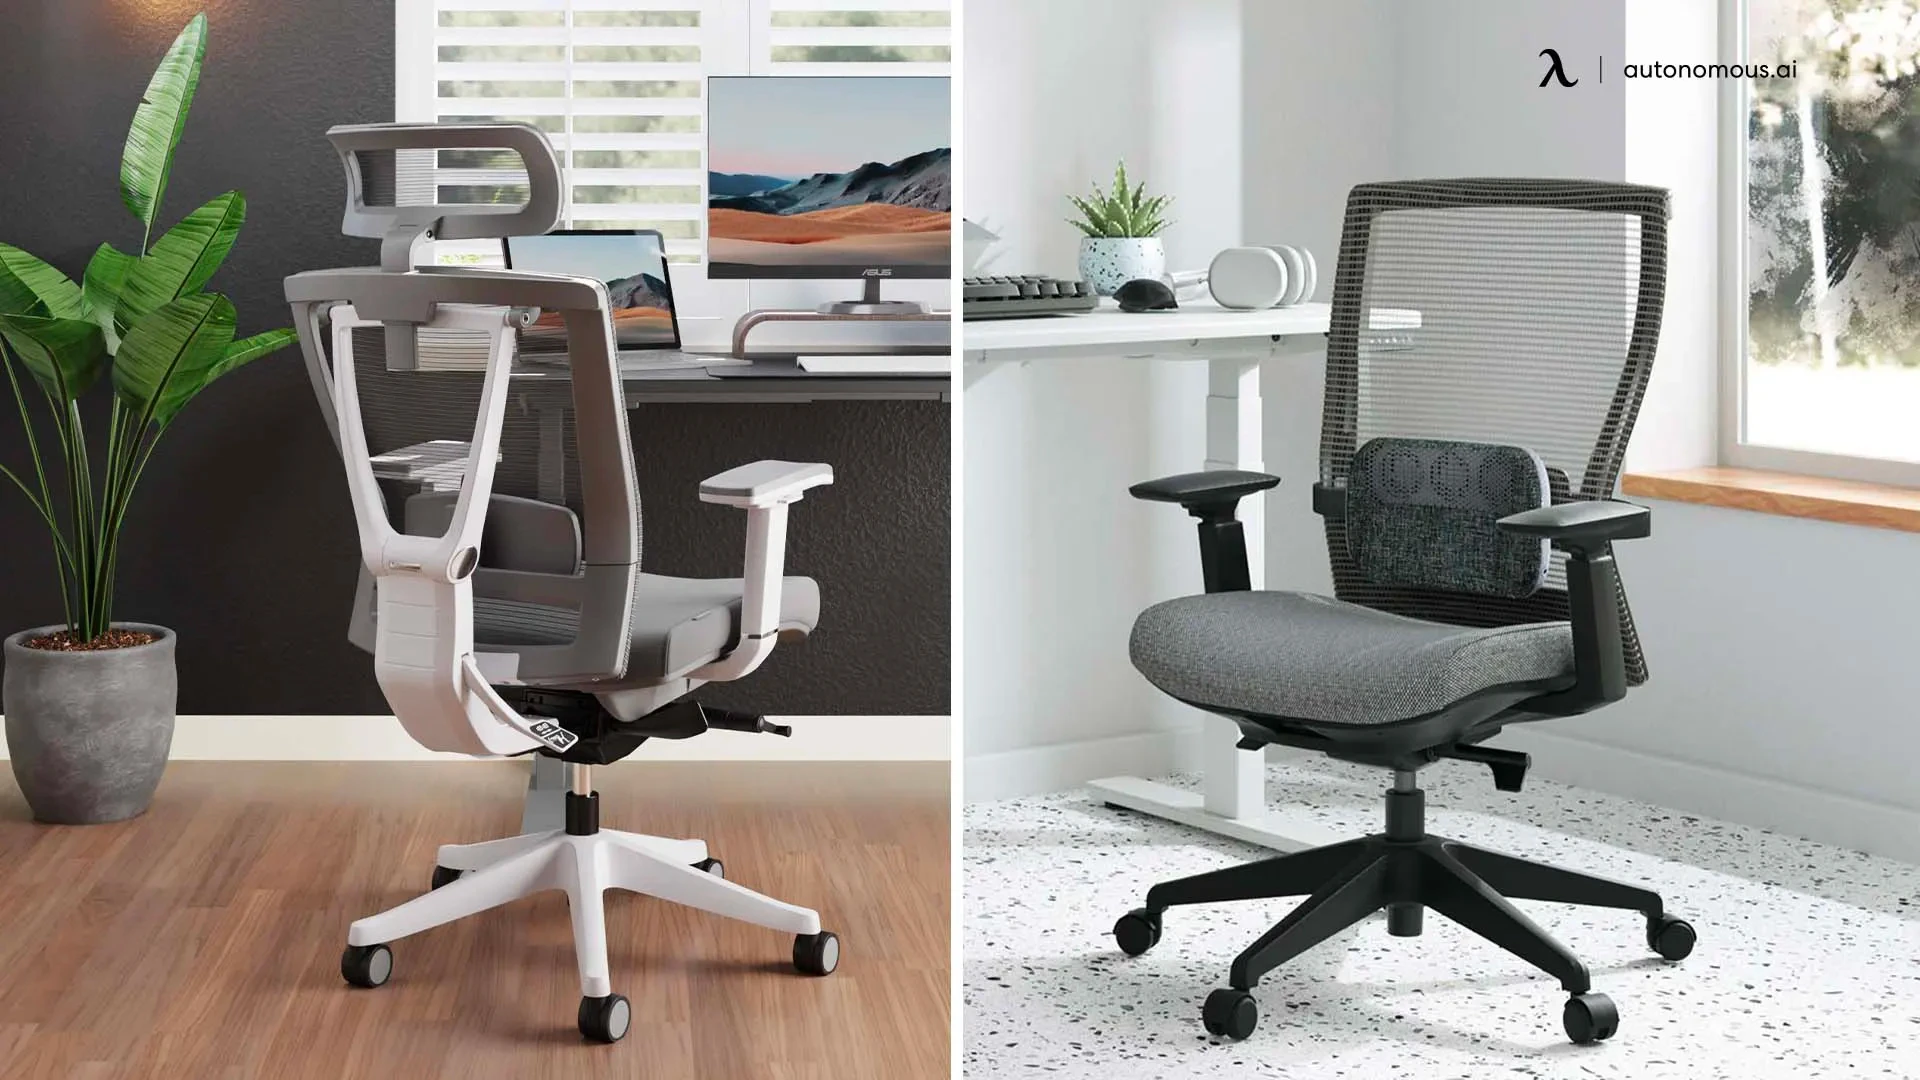 How Can Ergonomic Chairs Boost Productivity and Enhance Work Performance?